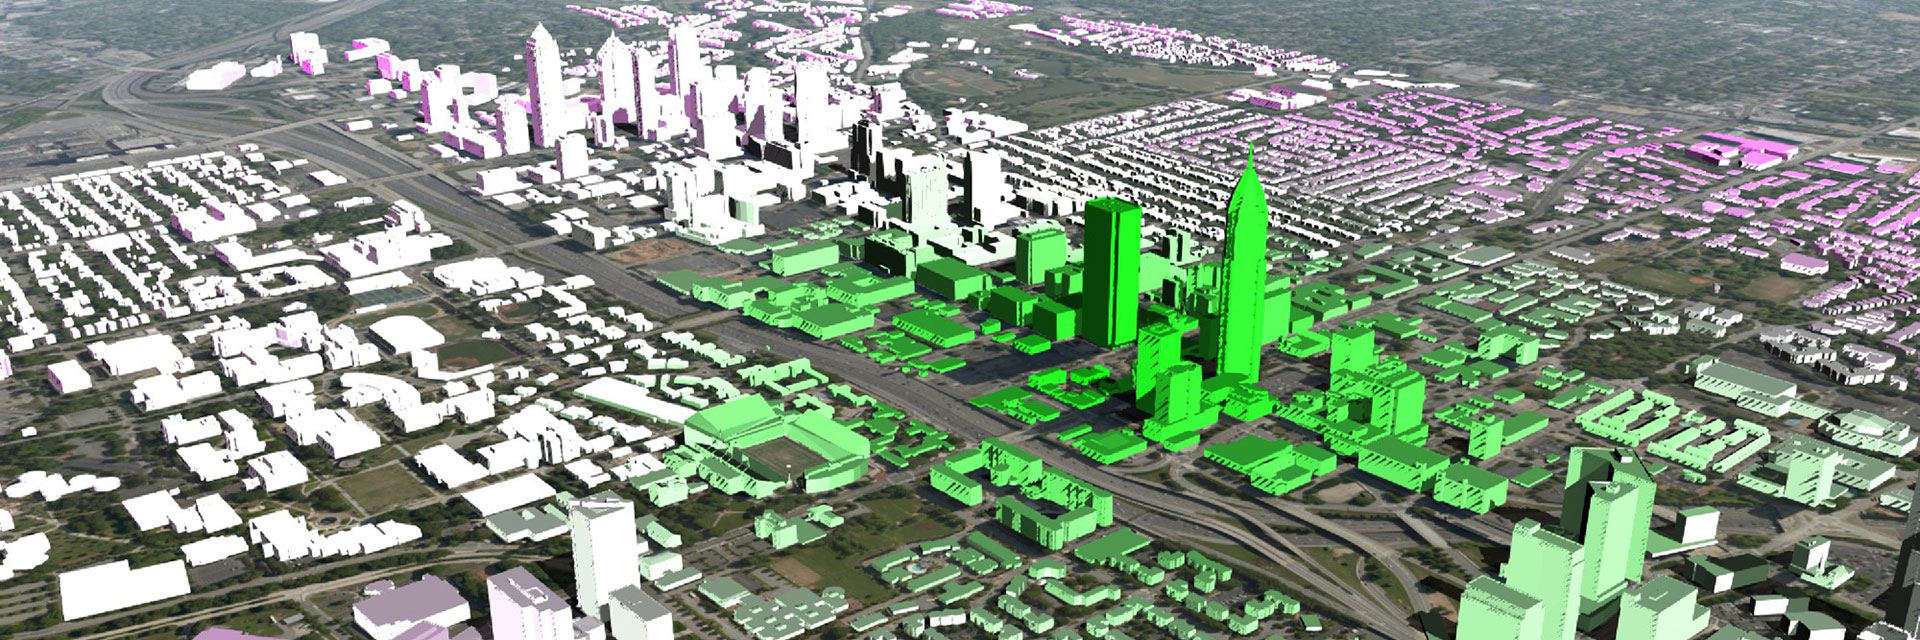 A "digital twin" rendering of an arial view of the buildings in downtown Atlanta.